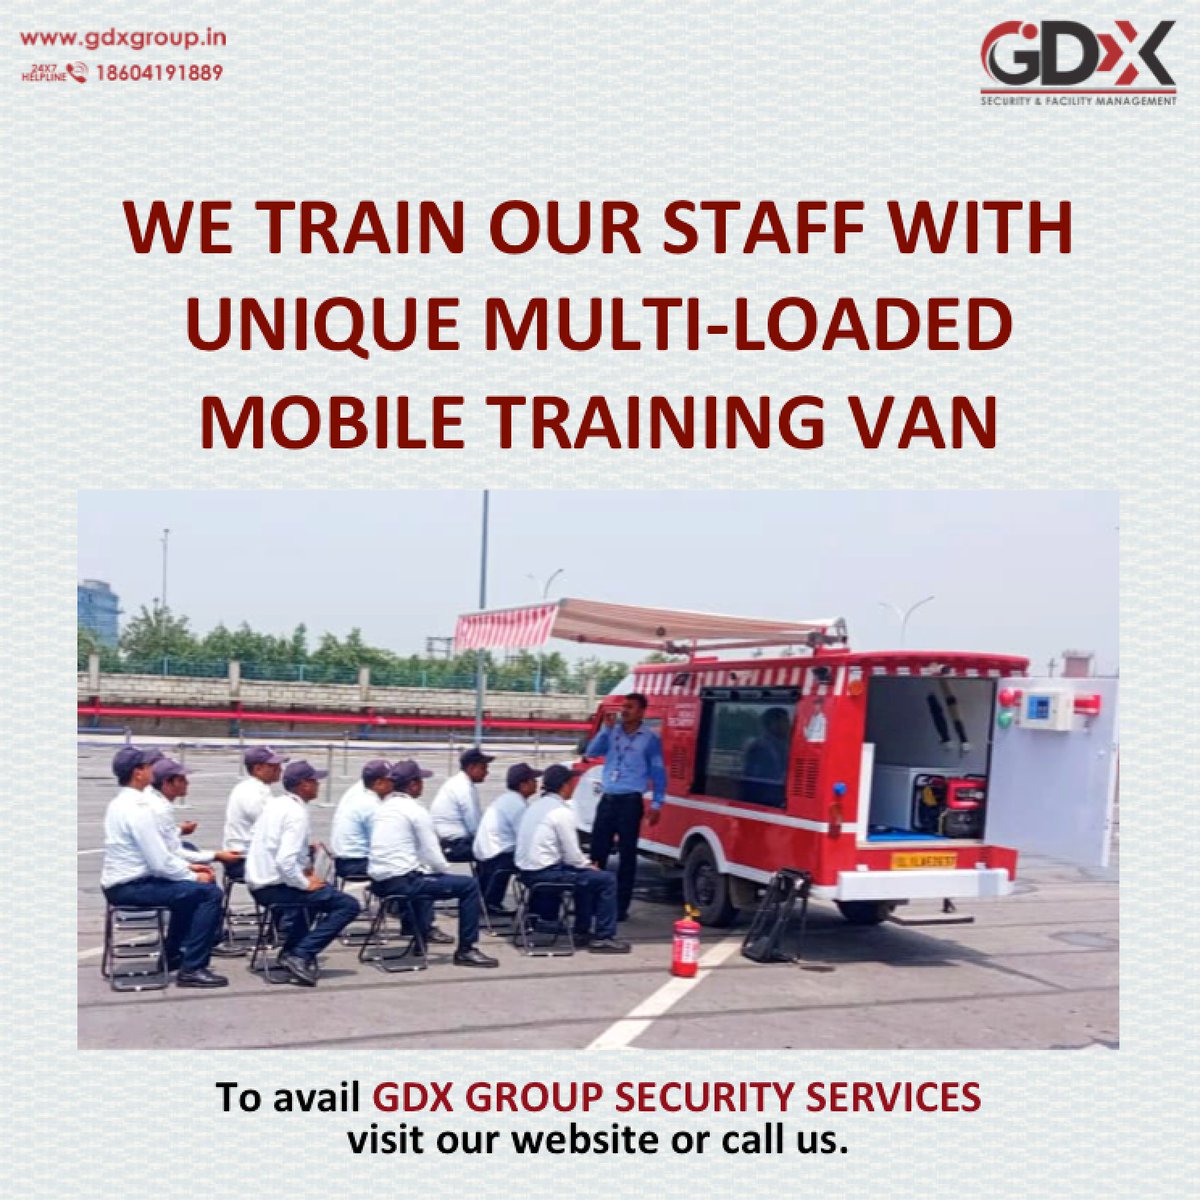 Discover the most advanced training with our multi-loaded 
Mobile Training Van at Samsung Electronics, Noida.
#GDXGroup #GDXtech #GDXuniqueservices  #SecurityServices #FacilityManagement #TrainingAtGDXCentreOfExcellence #GDXtraining #GDXCentreOfExcellence #GDXMobileTrainingVan